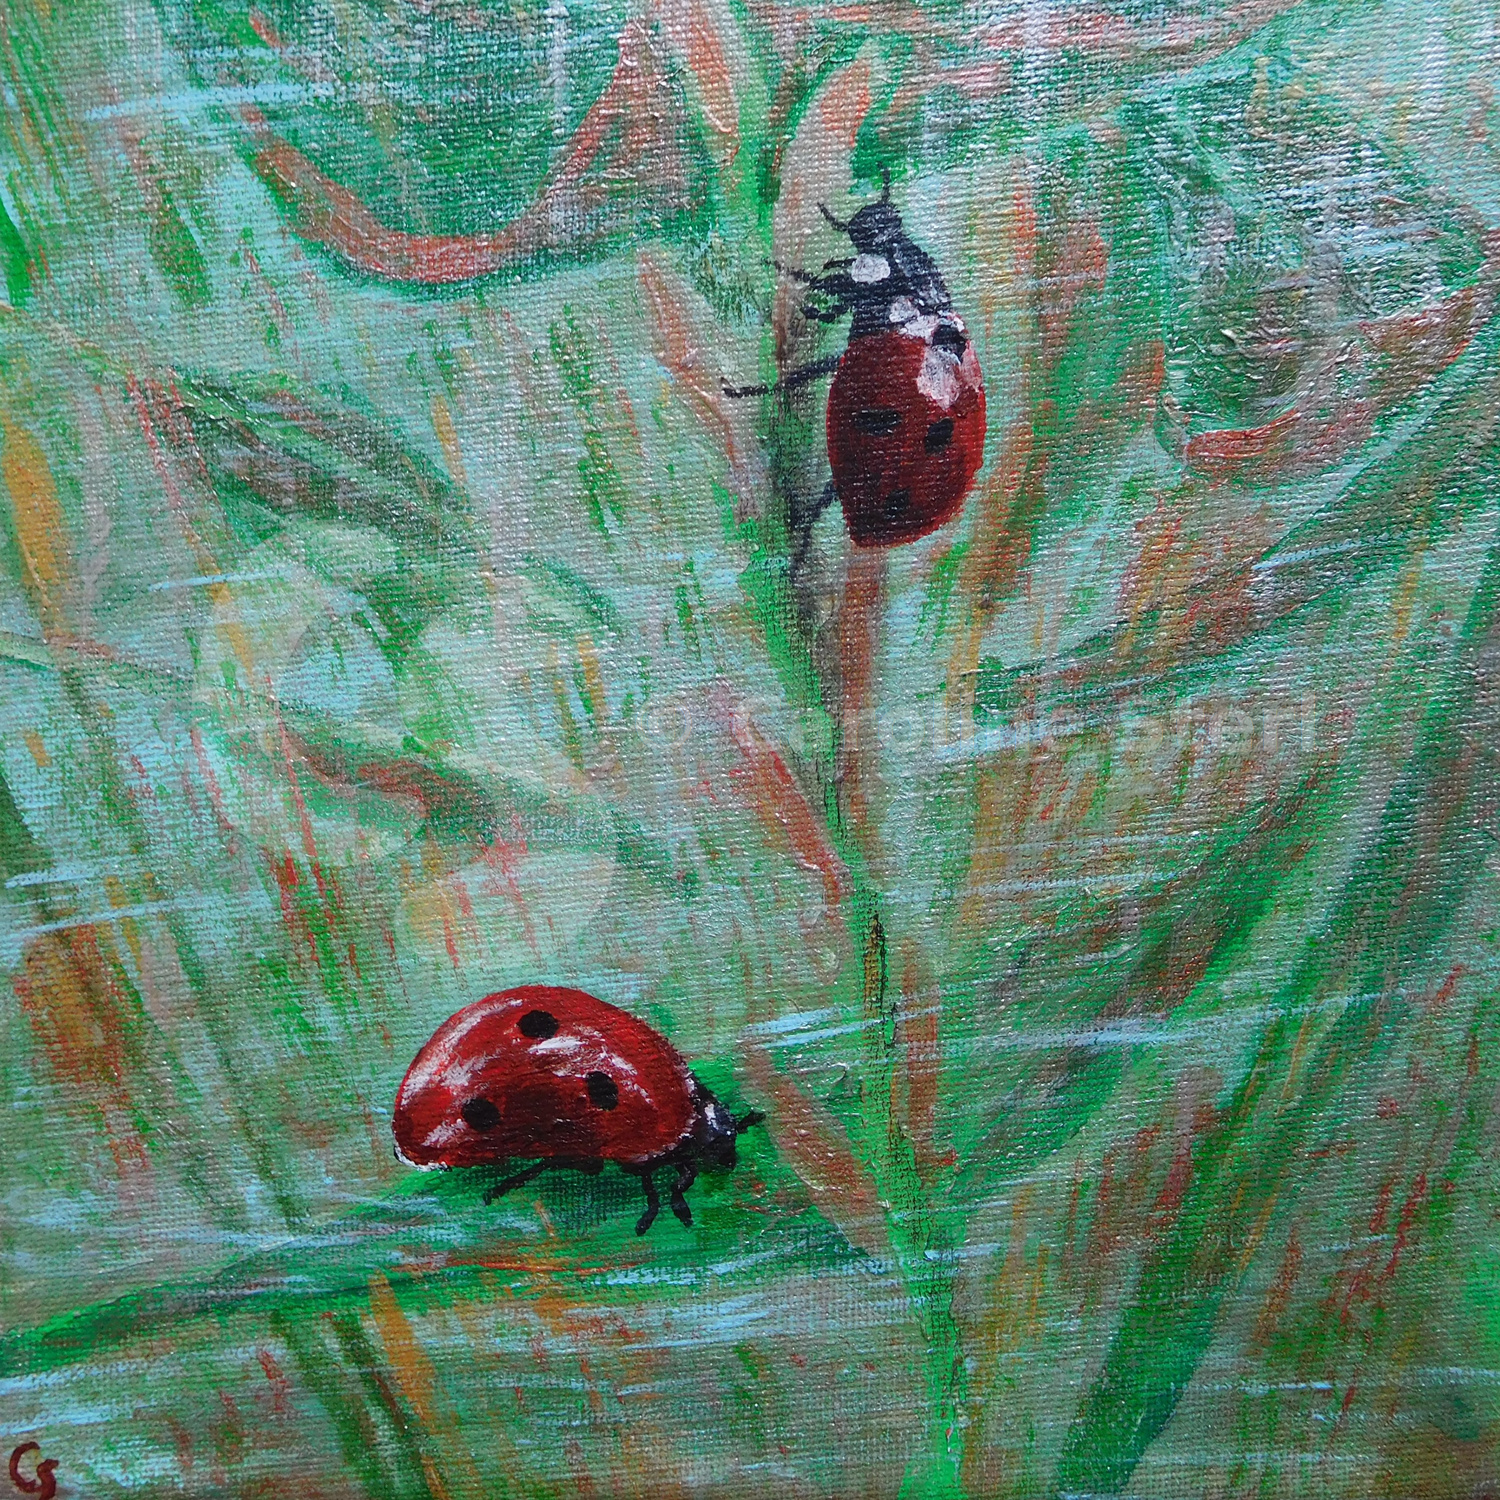 Painting: Two Ladybirds